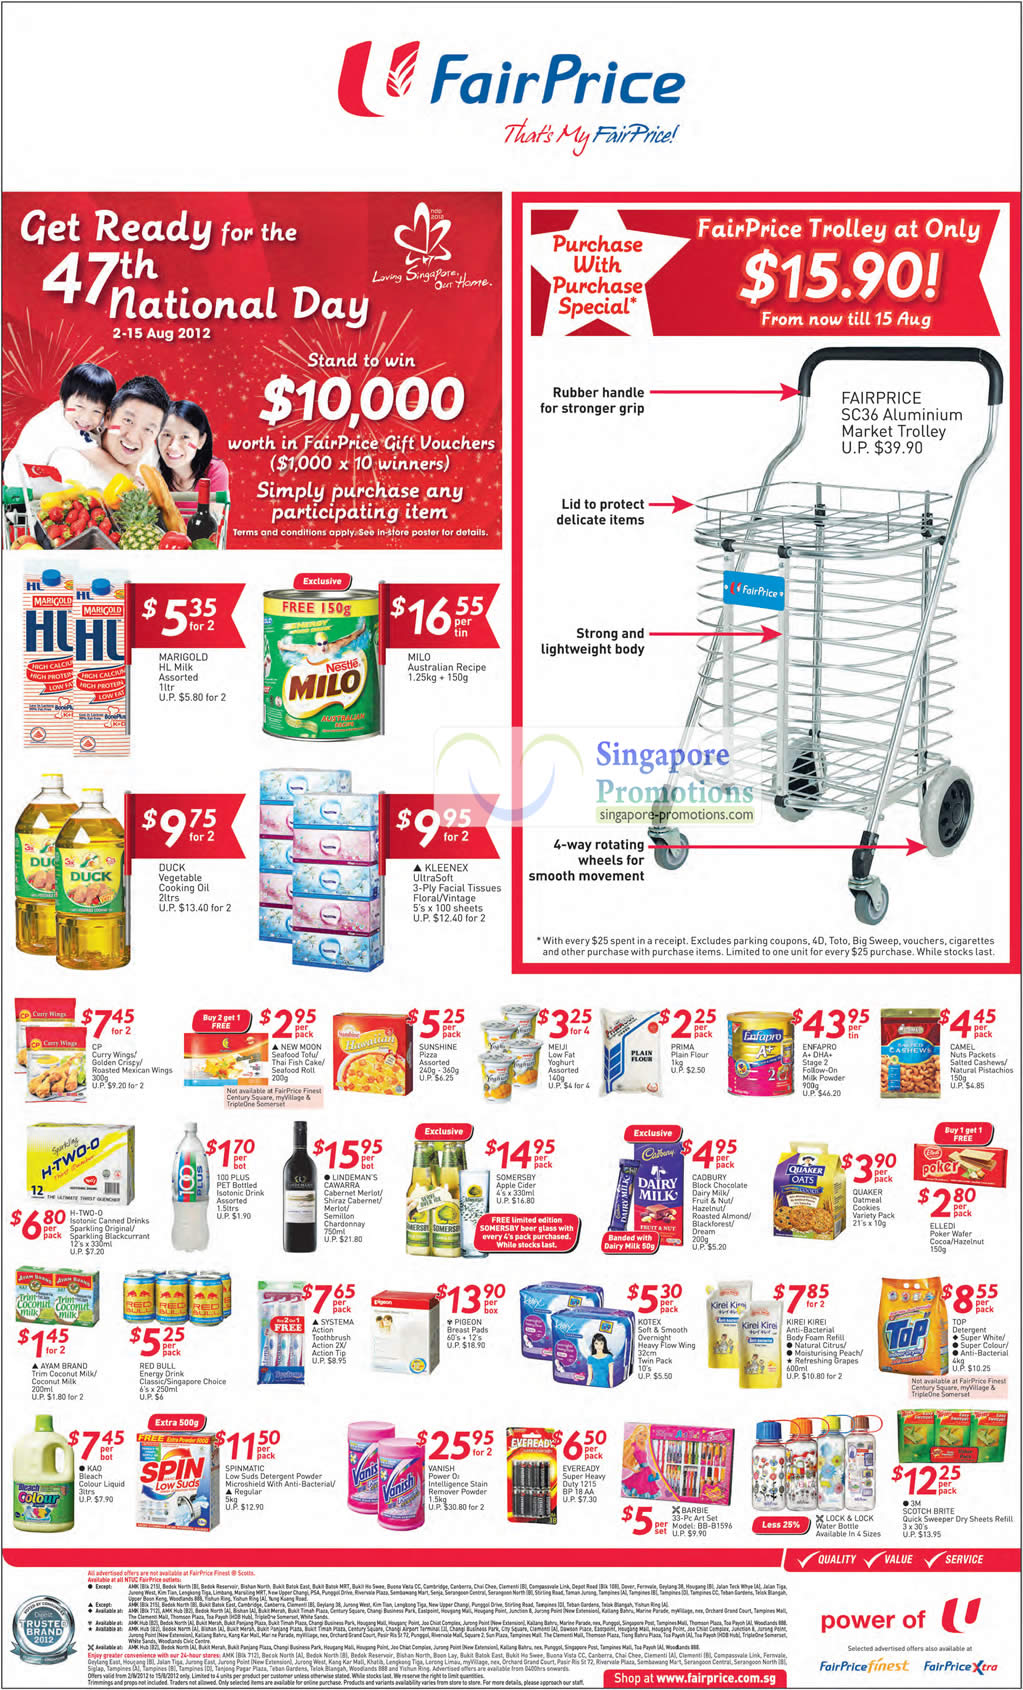 Featured image for NTUC Fairprice Electronics, Appliances & Kitchenware Offers 2 - 15 Aug 2012